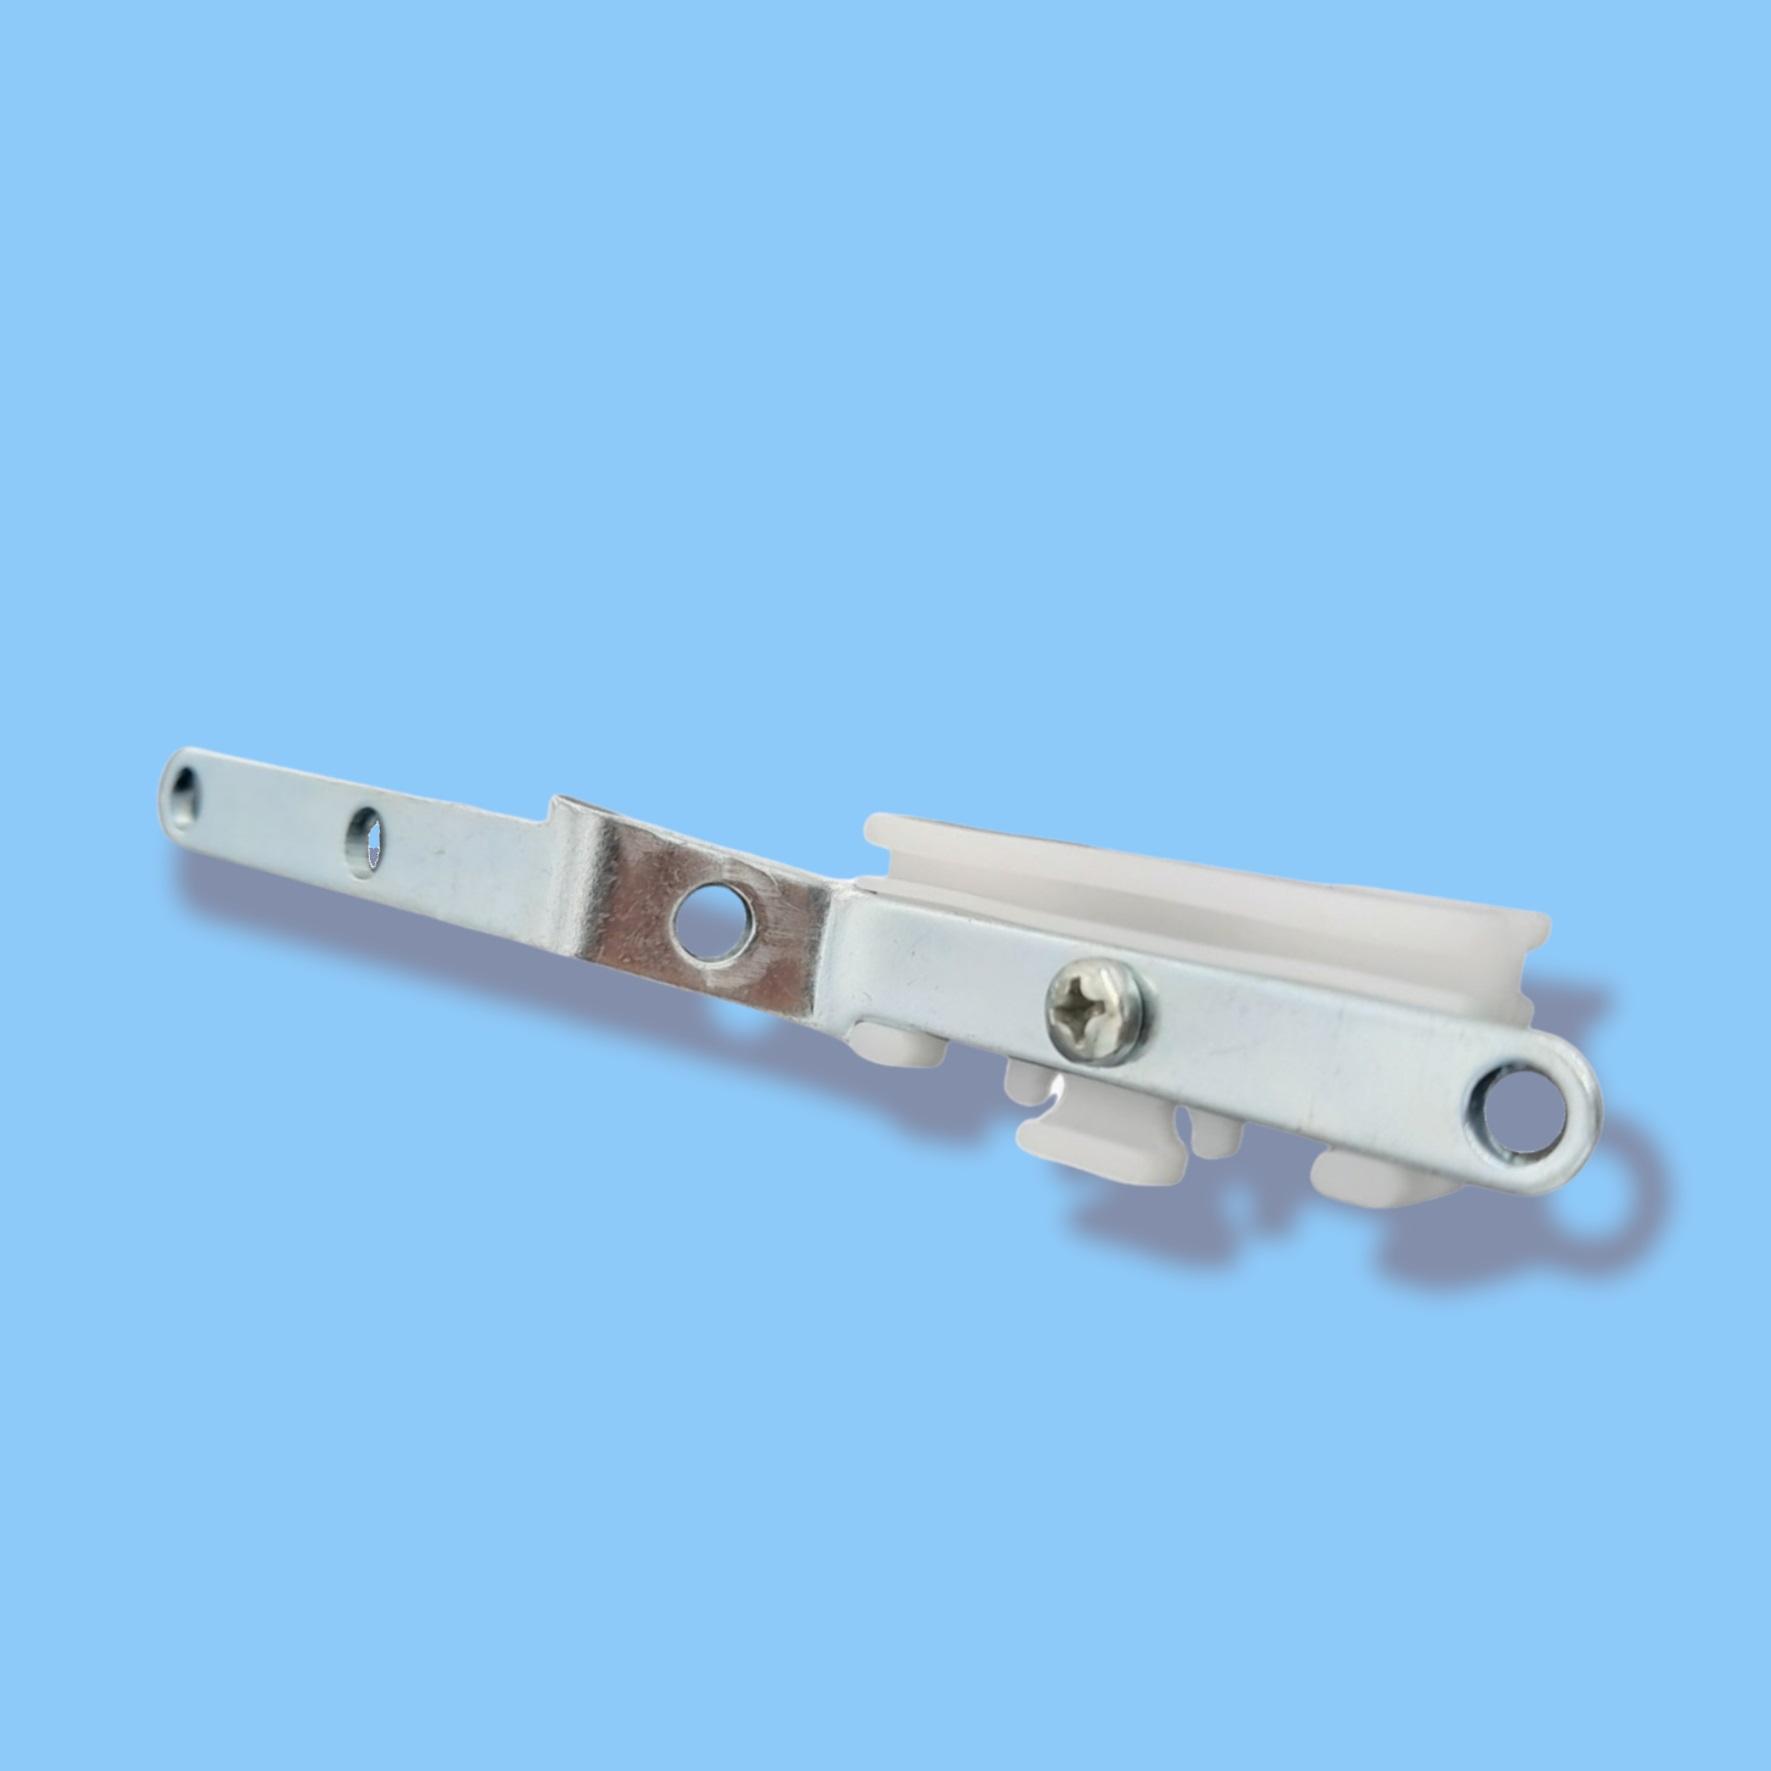 Overlap glider (master carrier) for cord operated curtain rail